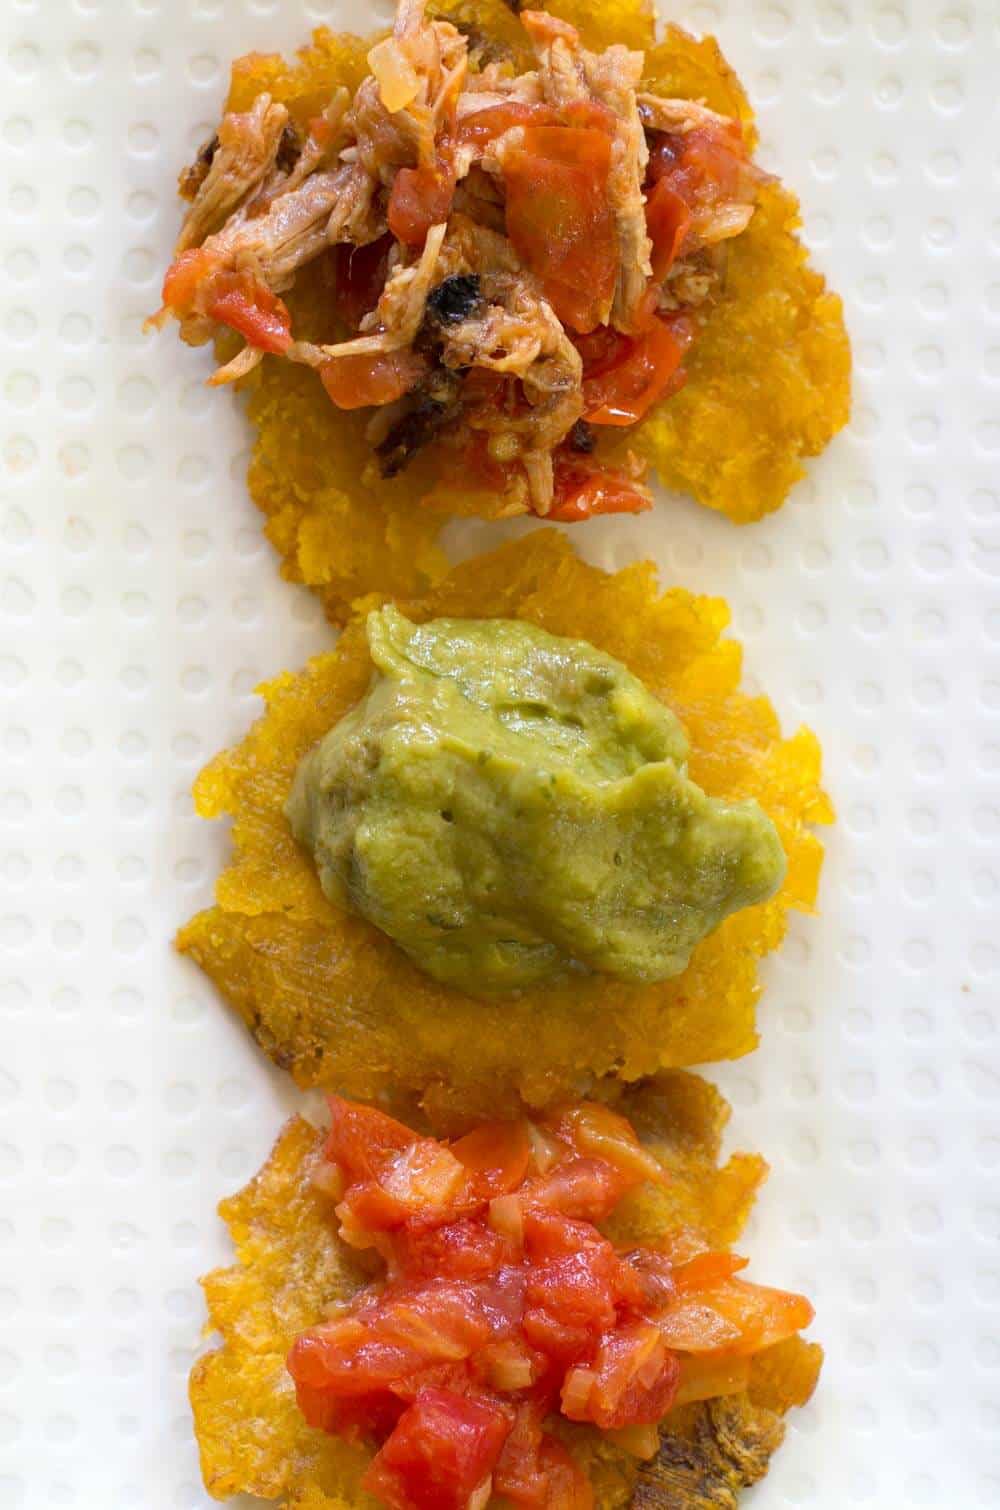 Patacones or green plantains on plate with hogao and other toppings